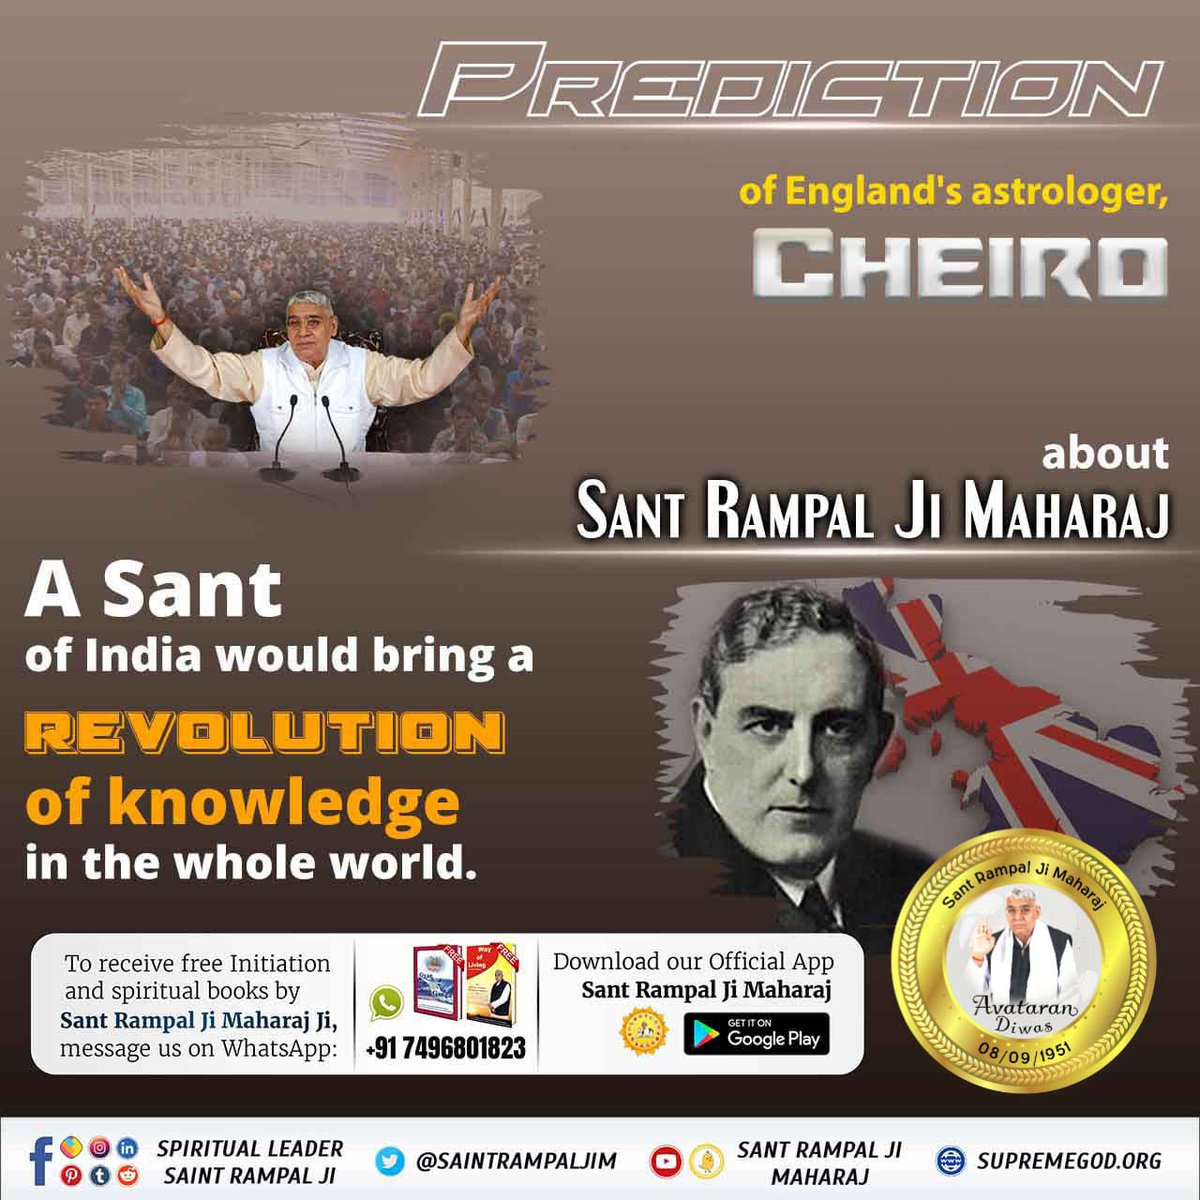 @ArjunSolankiAS #1DayLeft_For_AvataranDiwas
🌺🌺🌺England's astrologer, Chiero, had predicted in a book written in 1925 - Only a saint born in the latter half of the 20th century i.e. 2000 A.D. (after year 1950) would bring 'a new civilisation' in the world,..
🌺🌺🌺🌺
Sant Rampal Ji Maharaj